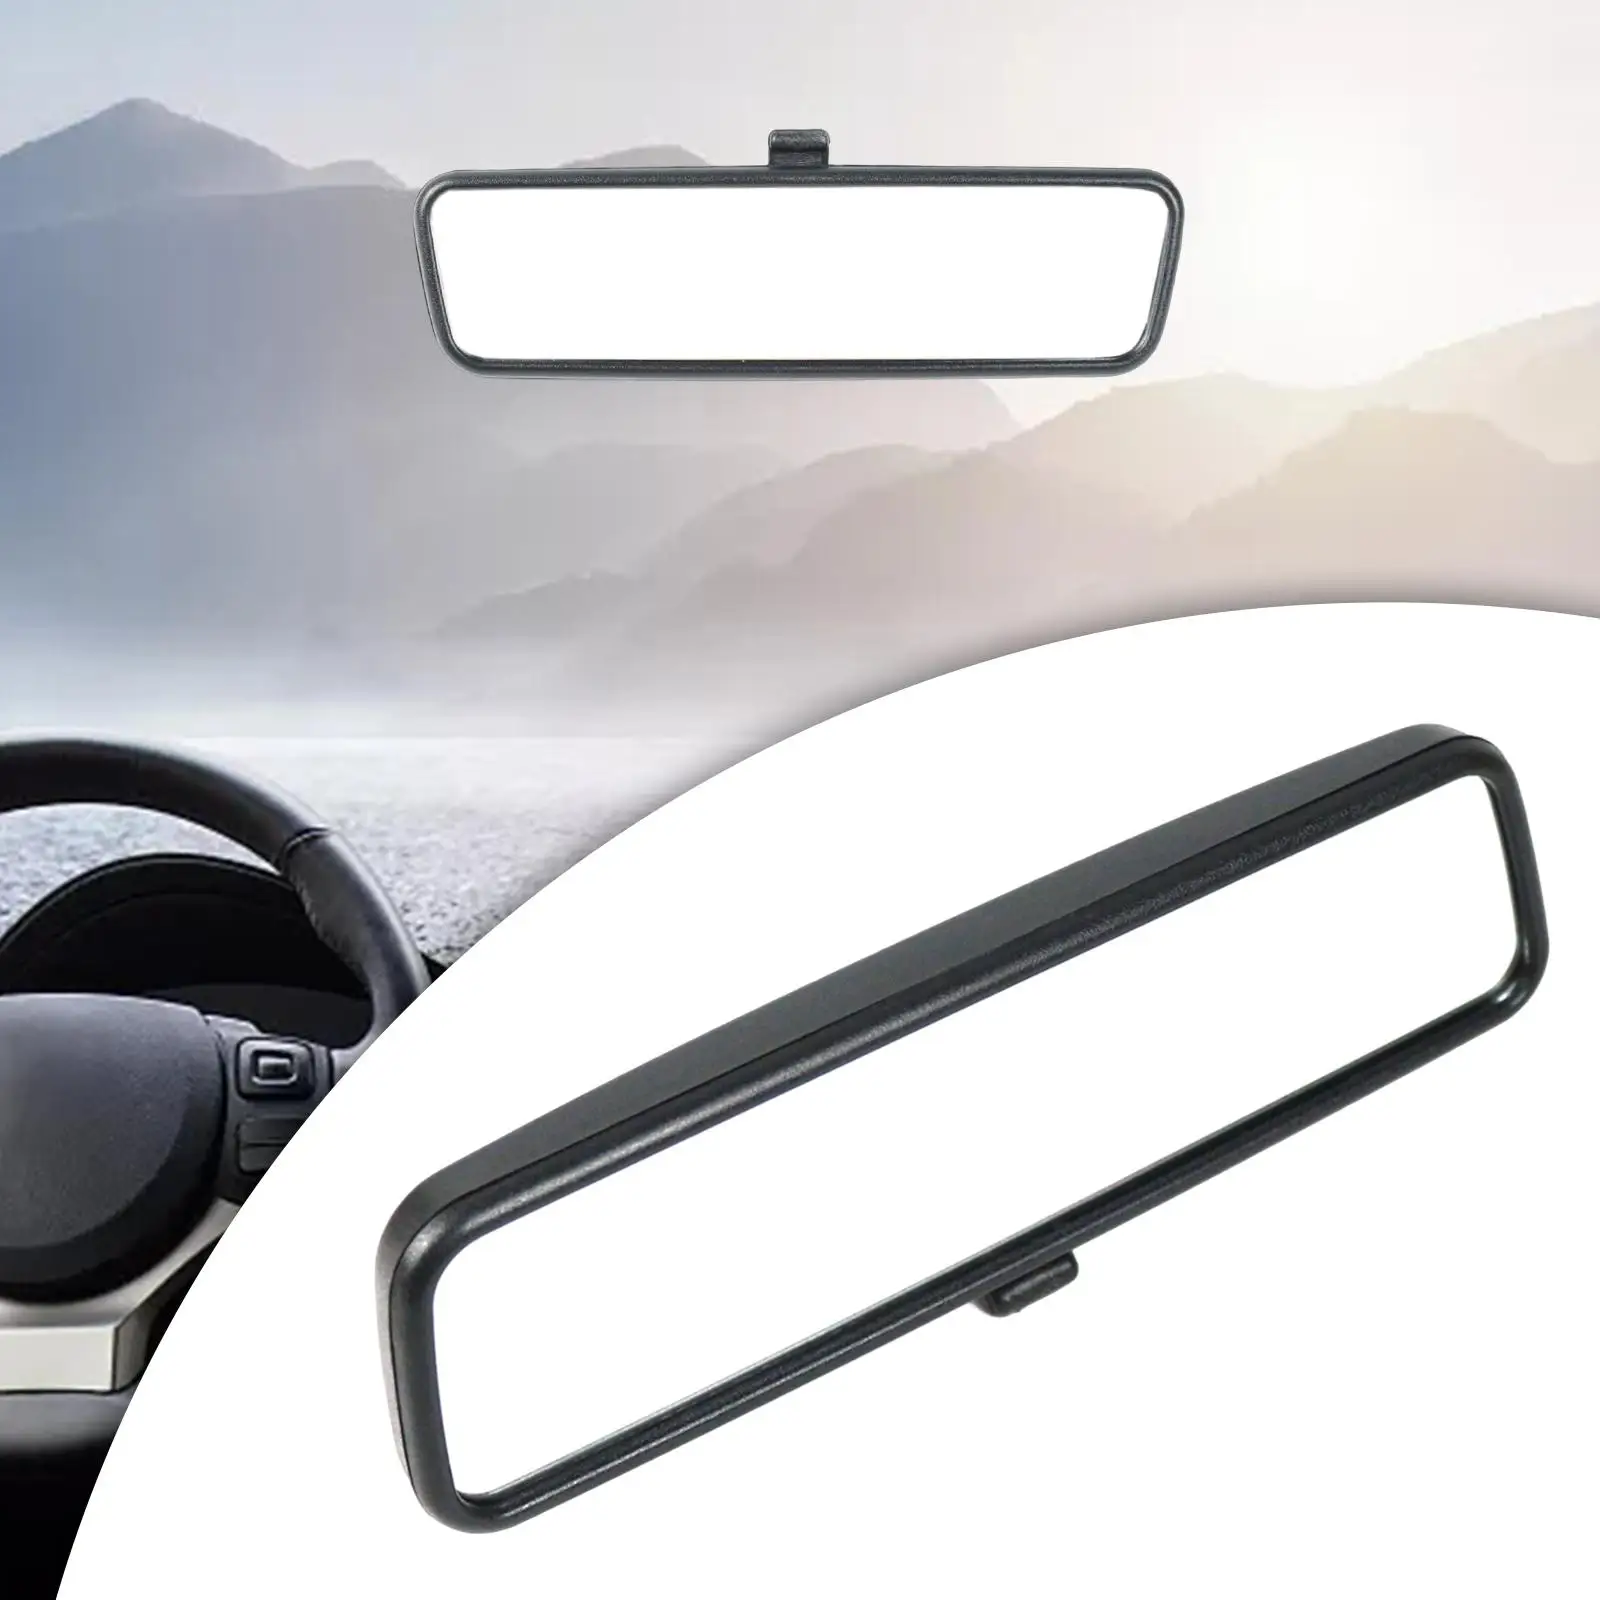 Interior Rear View Mirror, 814842 for C1 Car Replaces Durable Auto Accessories